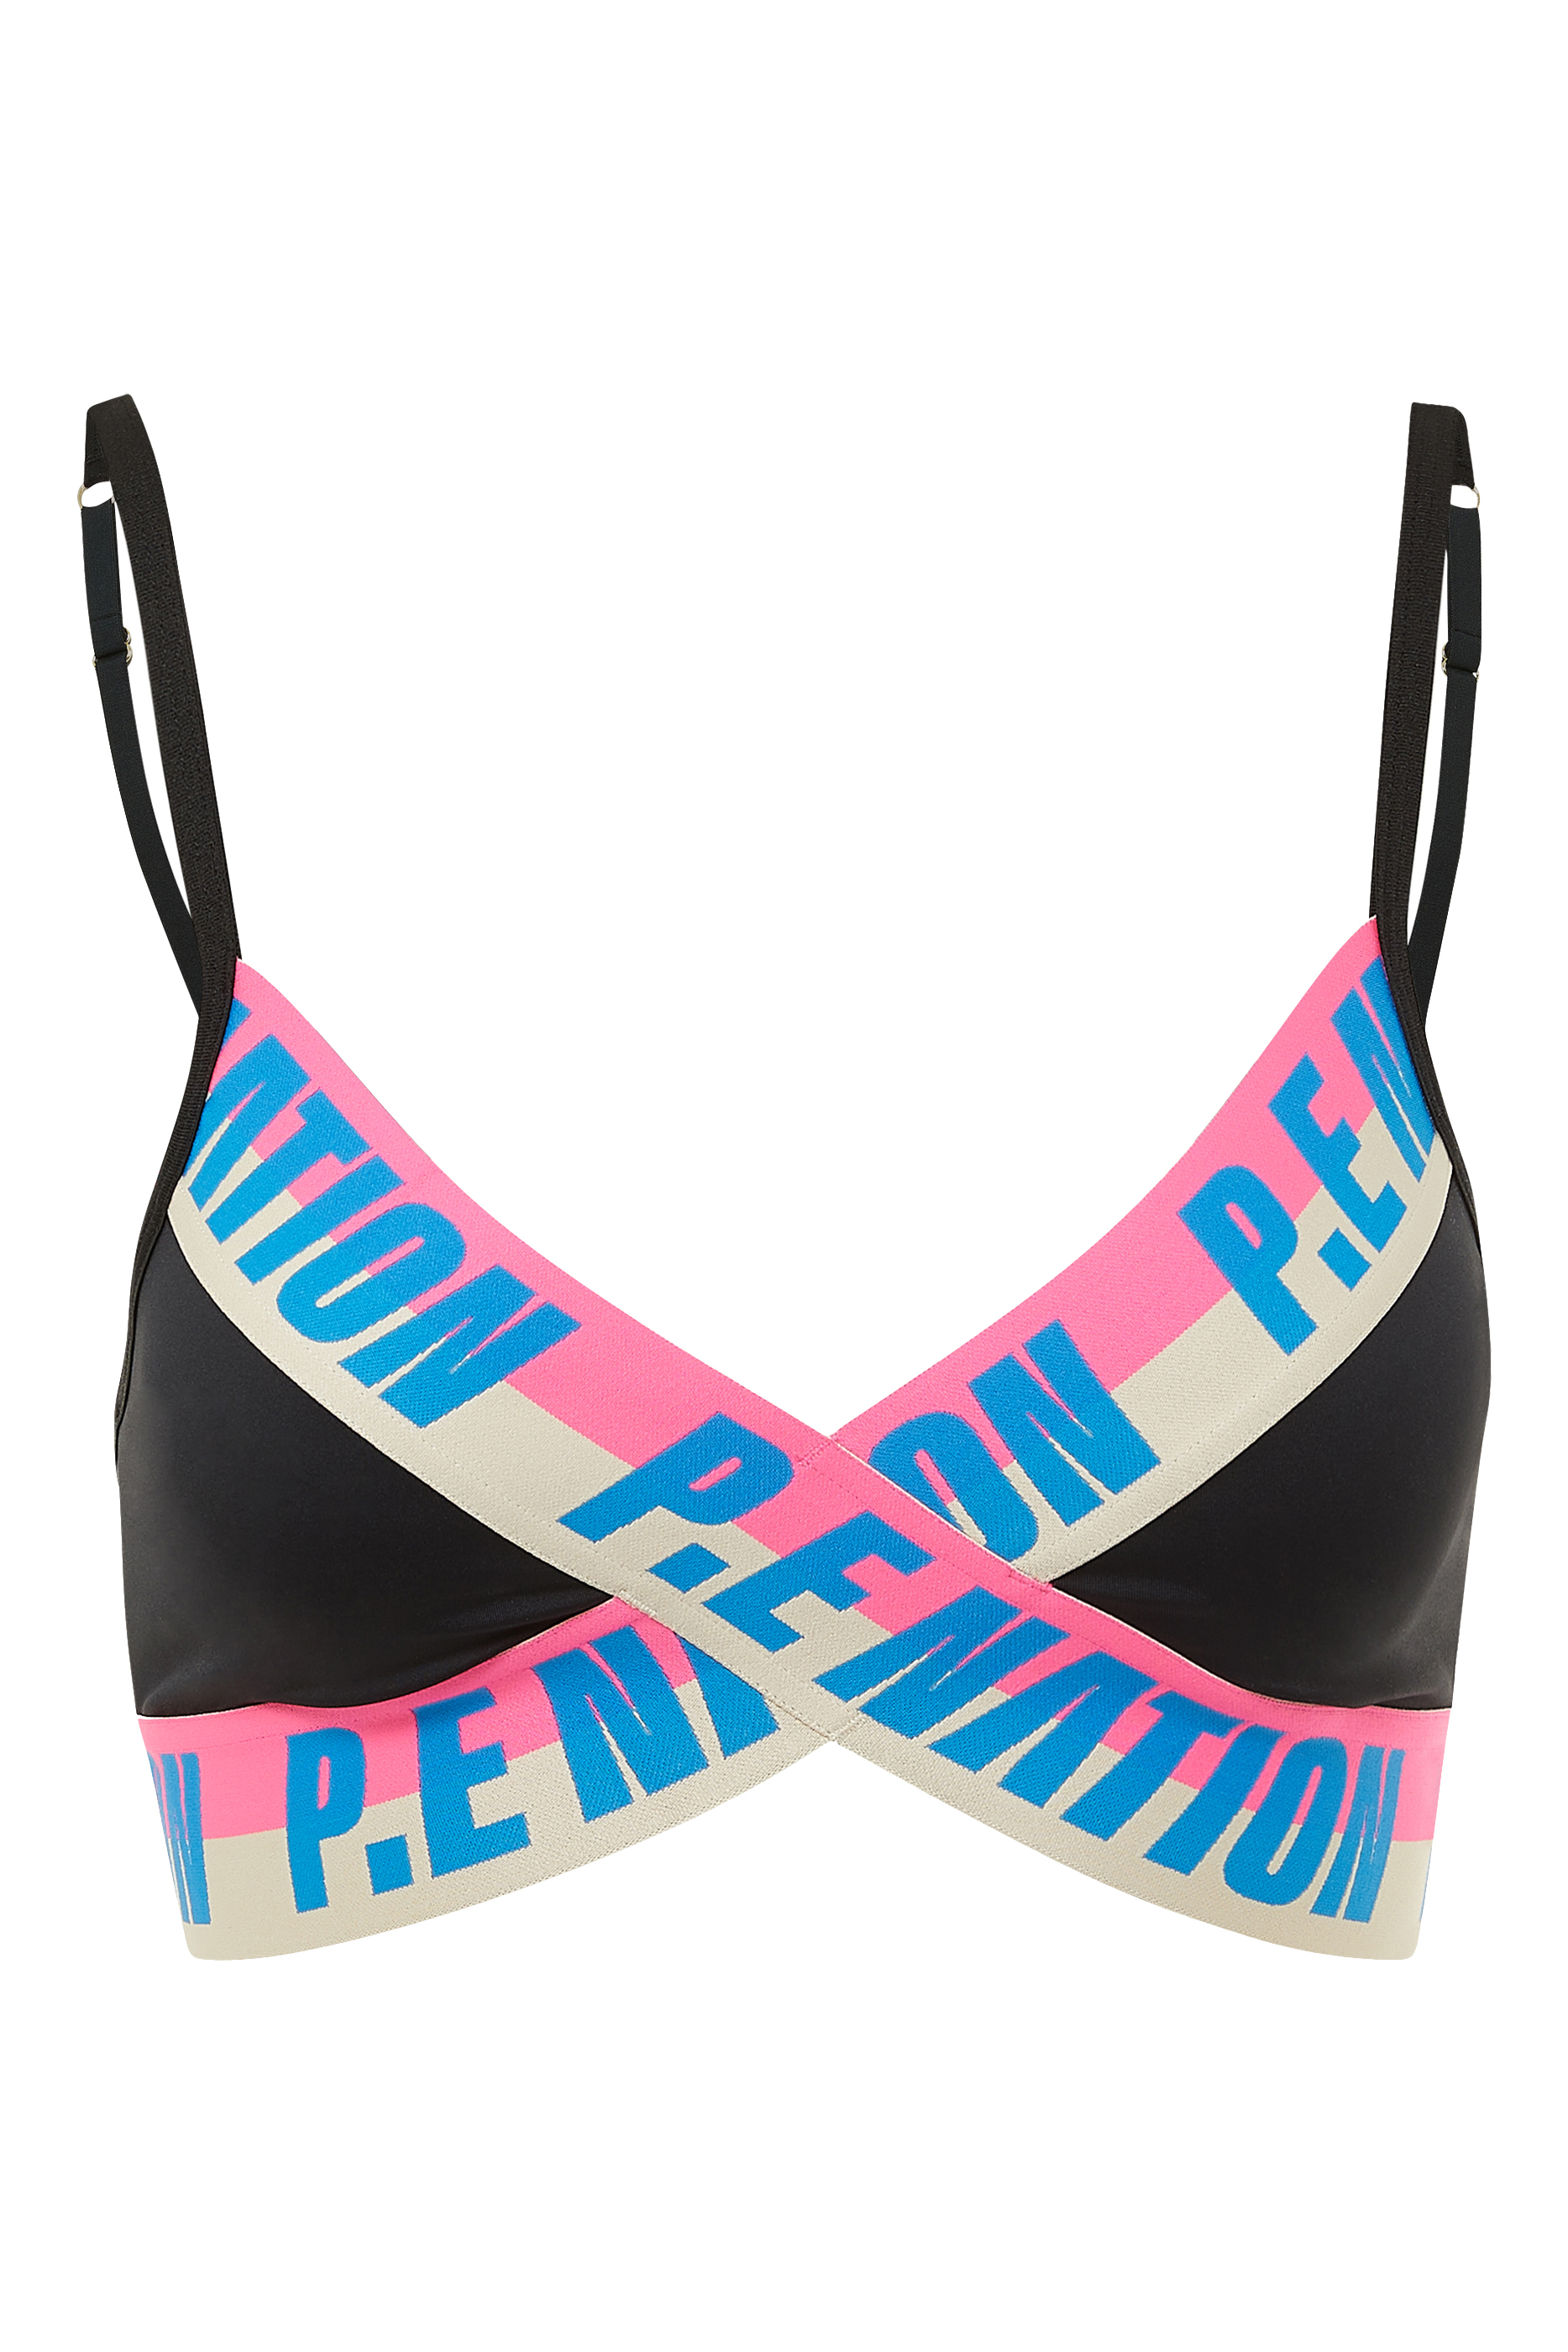 Buy PE Nation Half Volley Sports Bra for Womens